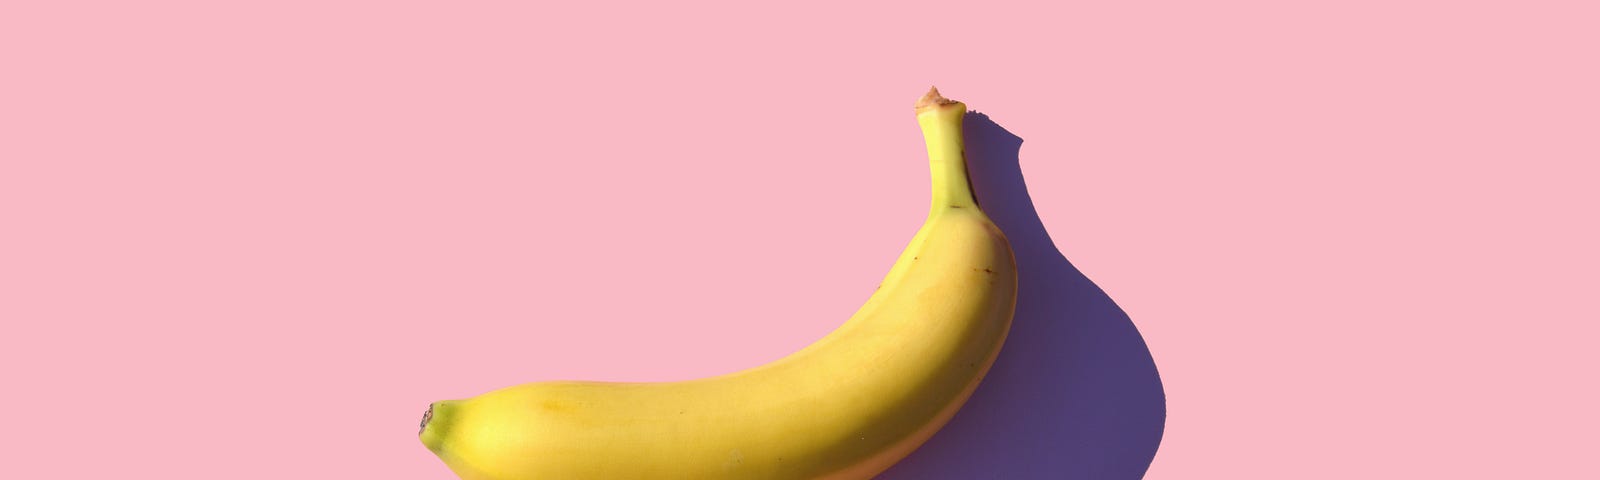 A banana in a pink backdrop